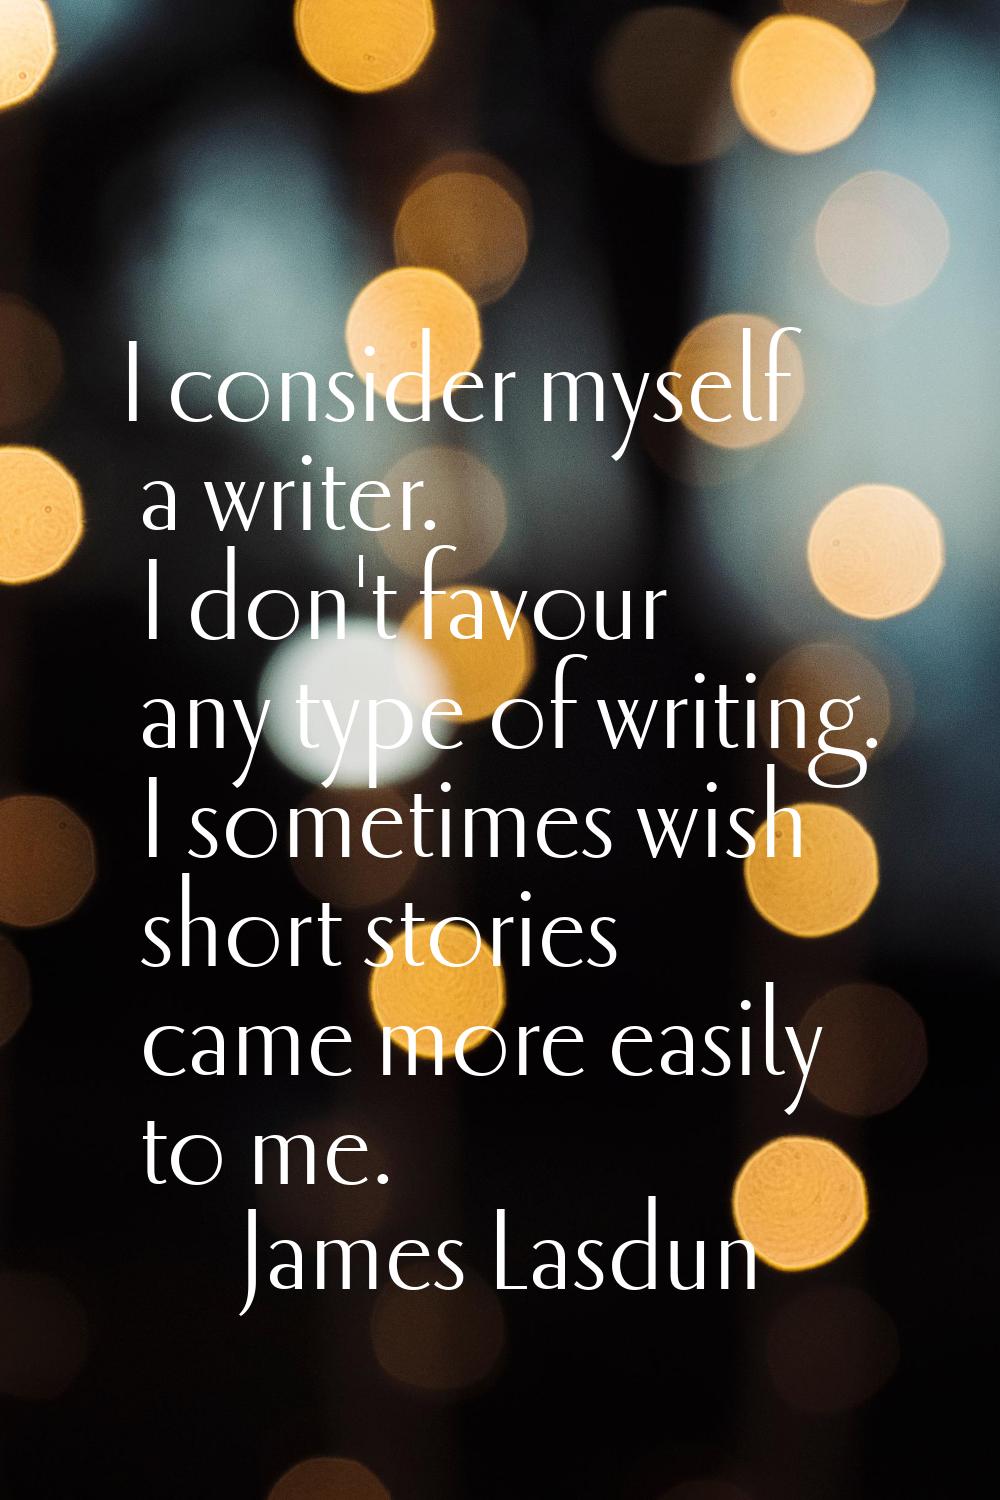 I consider myself a writer. I don't favour any type of writing. I sometimes wish short stories came